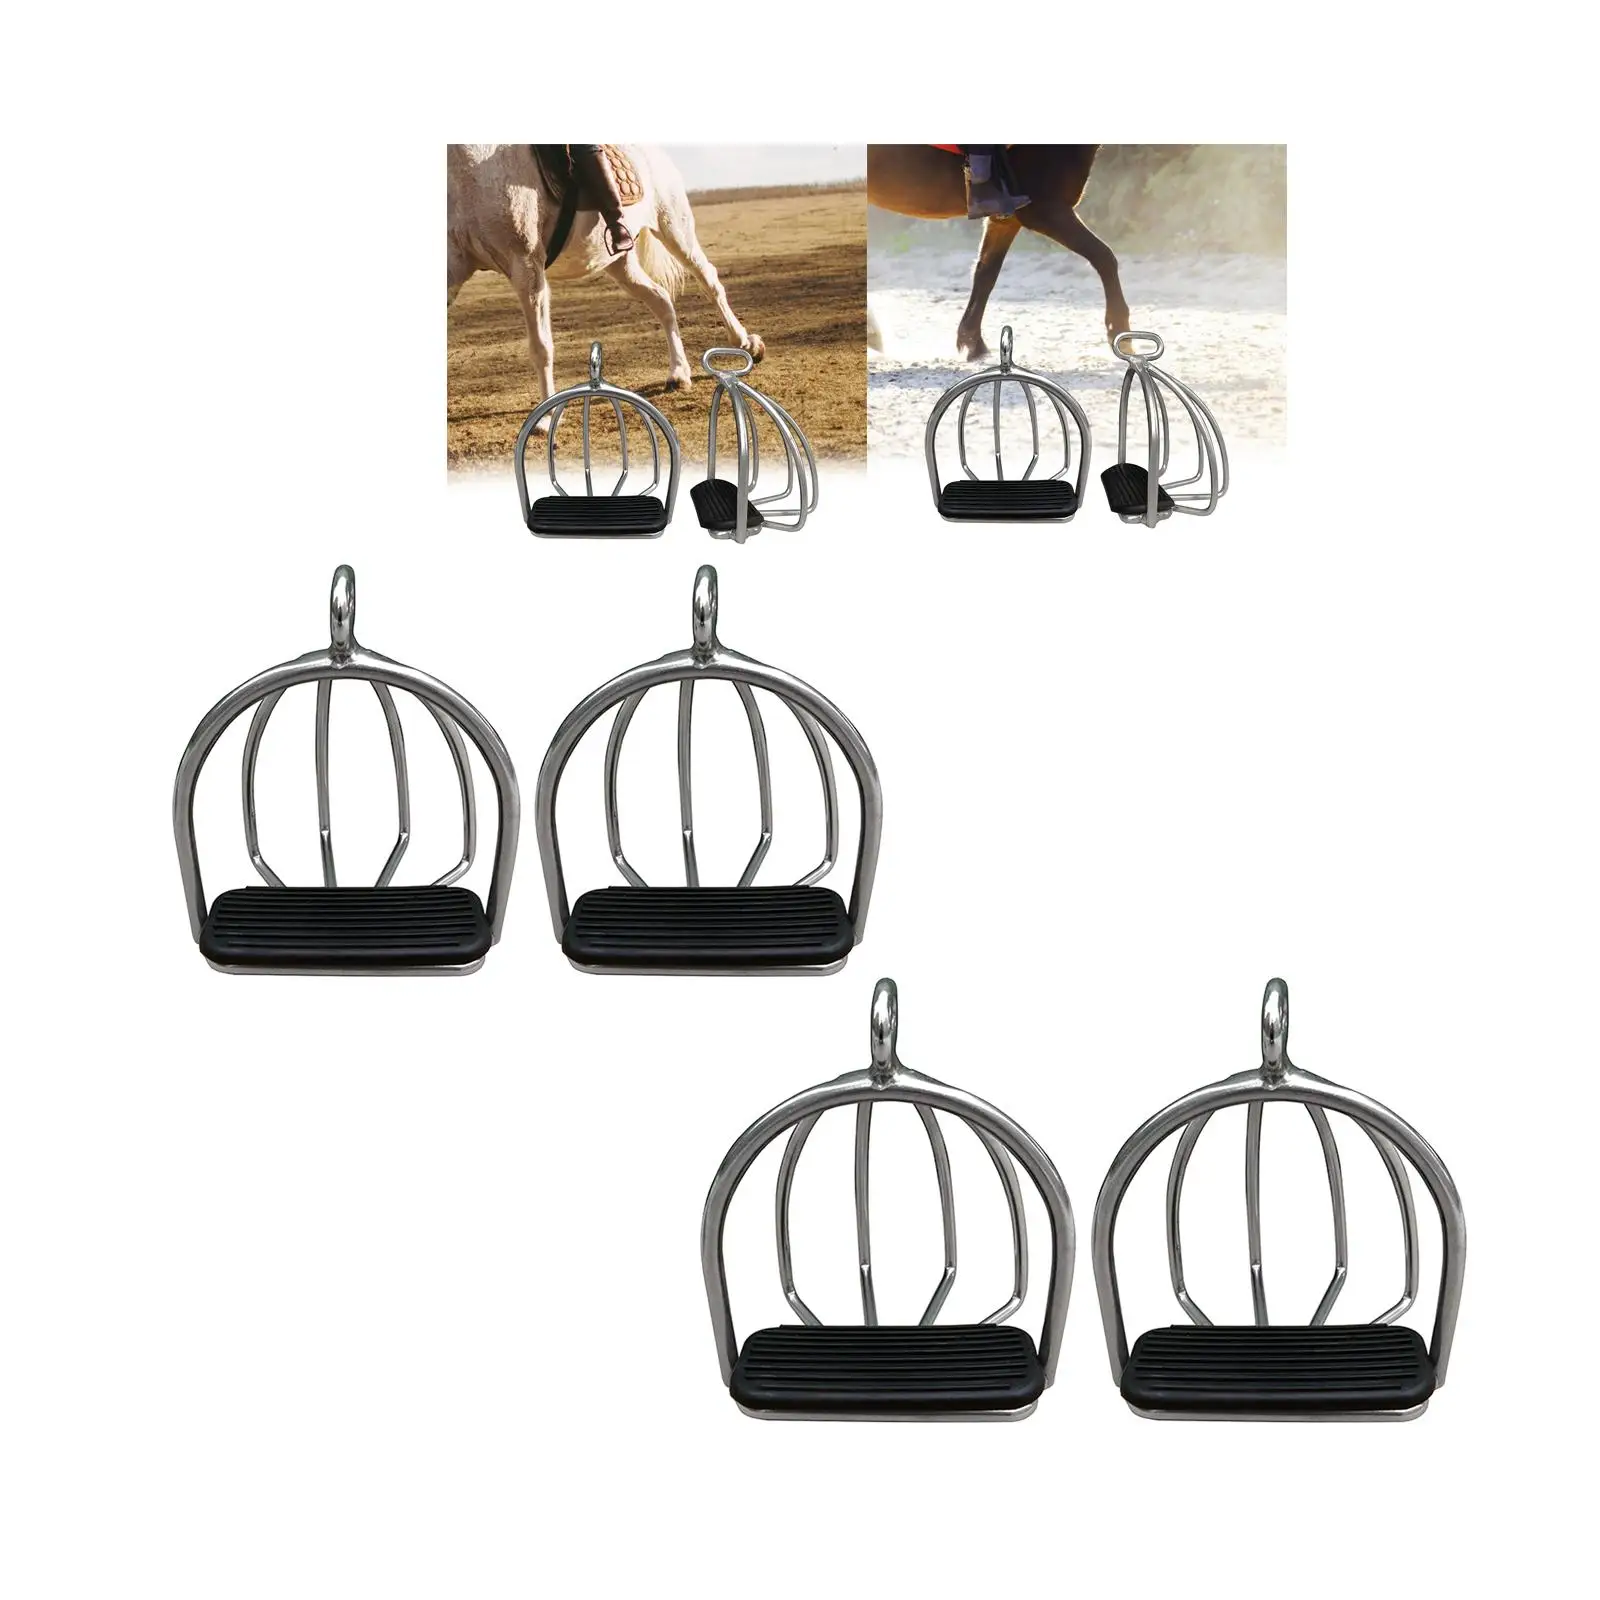 2Pcs Cage Horse Riding Stirrups Steel Flexible Tool Anti-Skid High Strength for Horse Riding Outdoor Sports Supplies Kids Adults